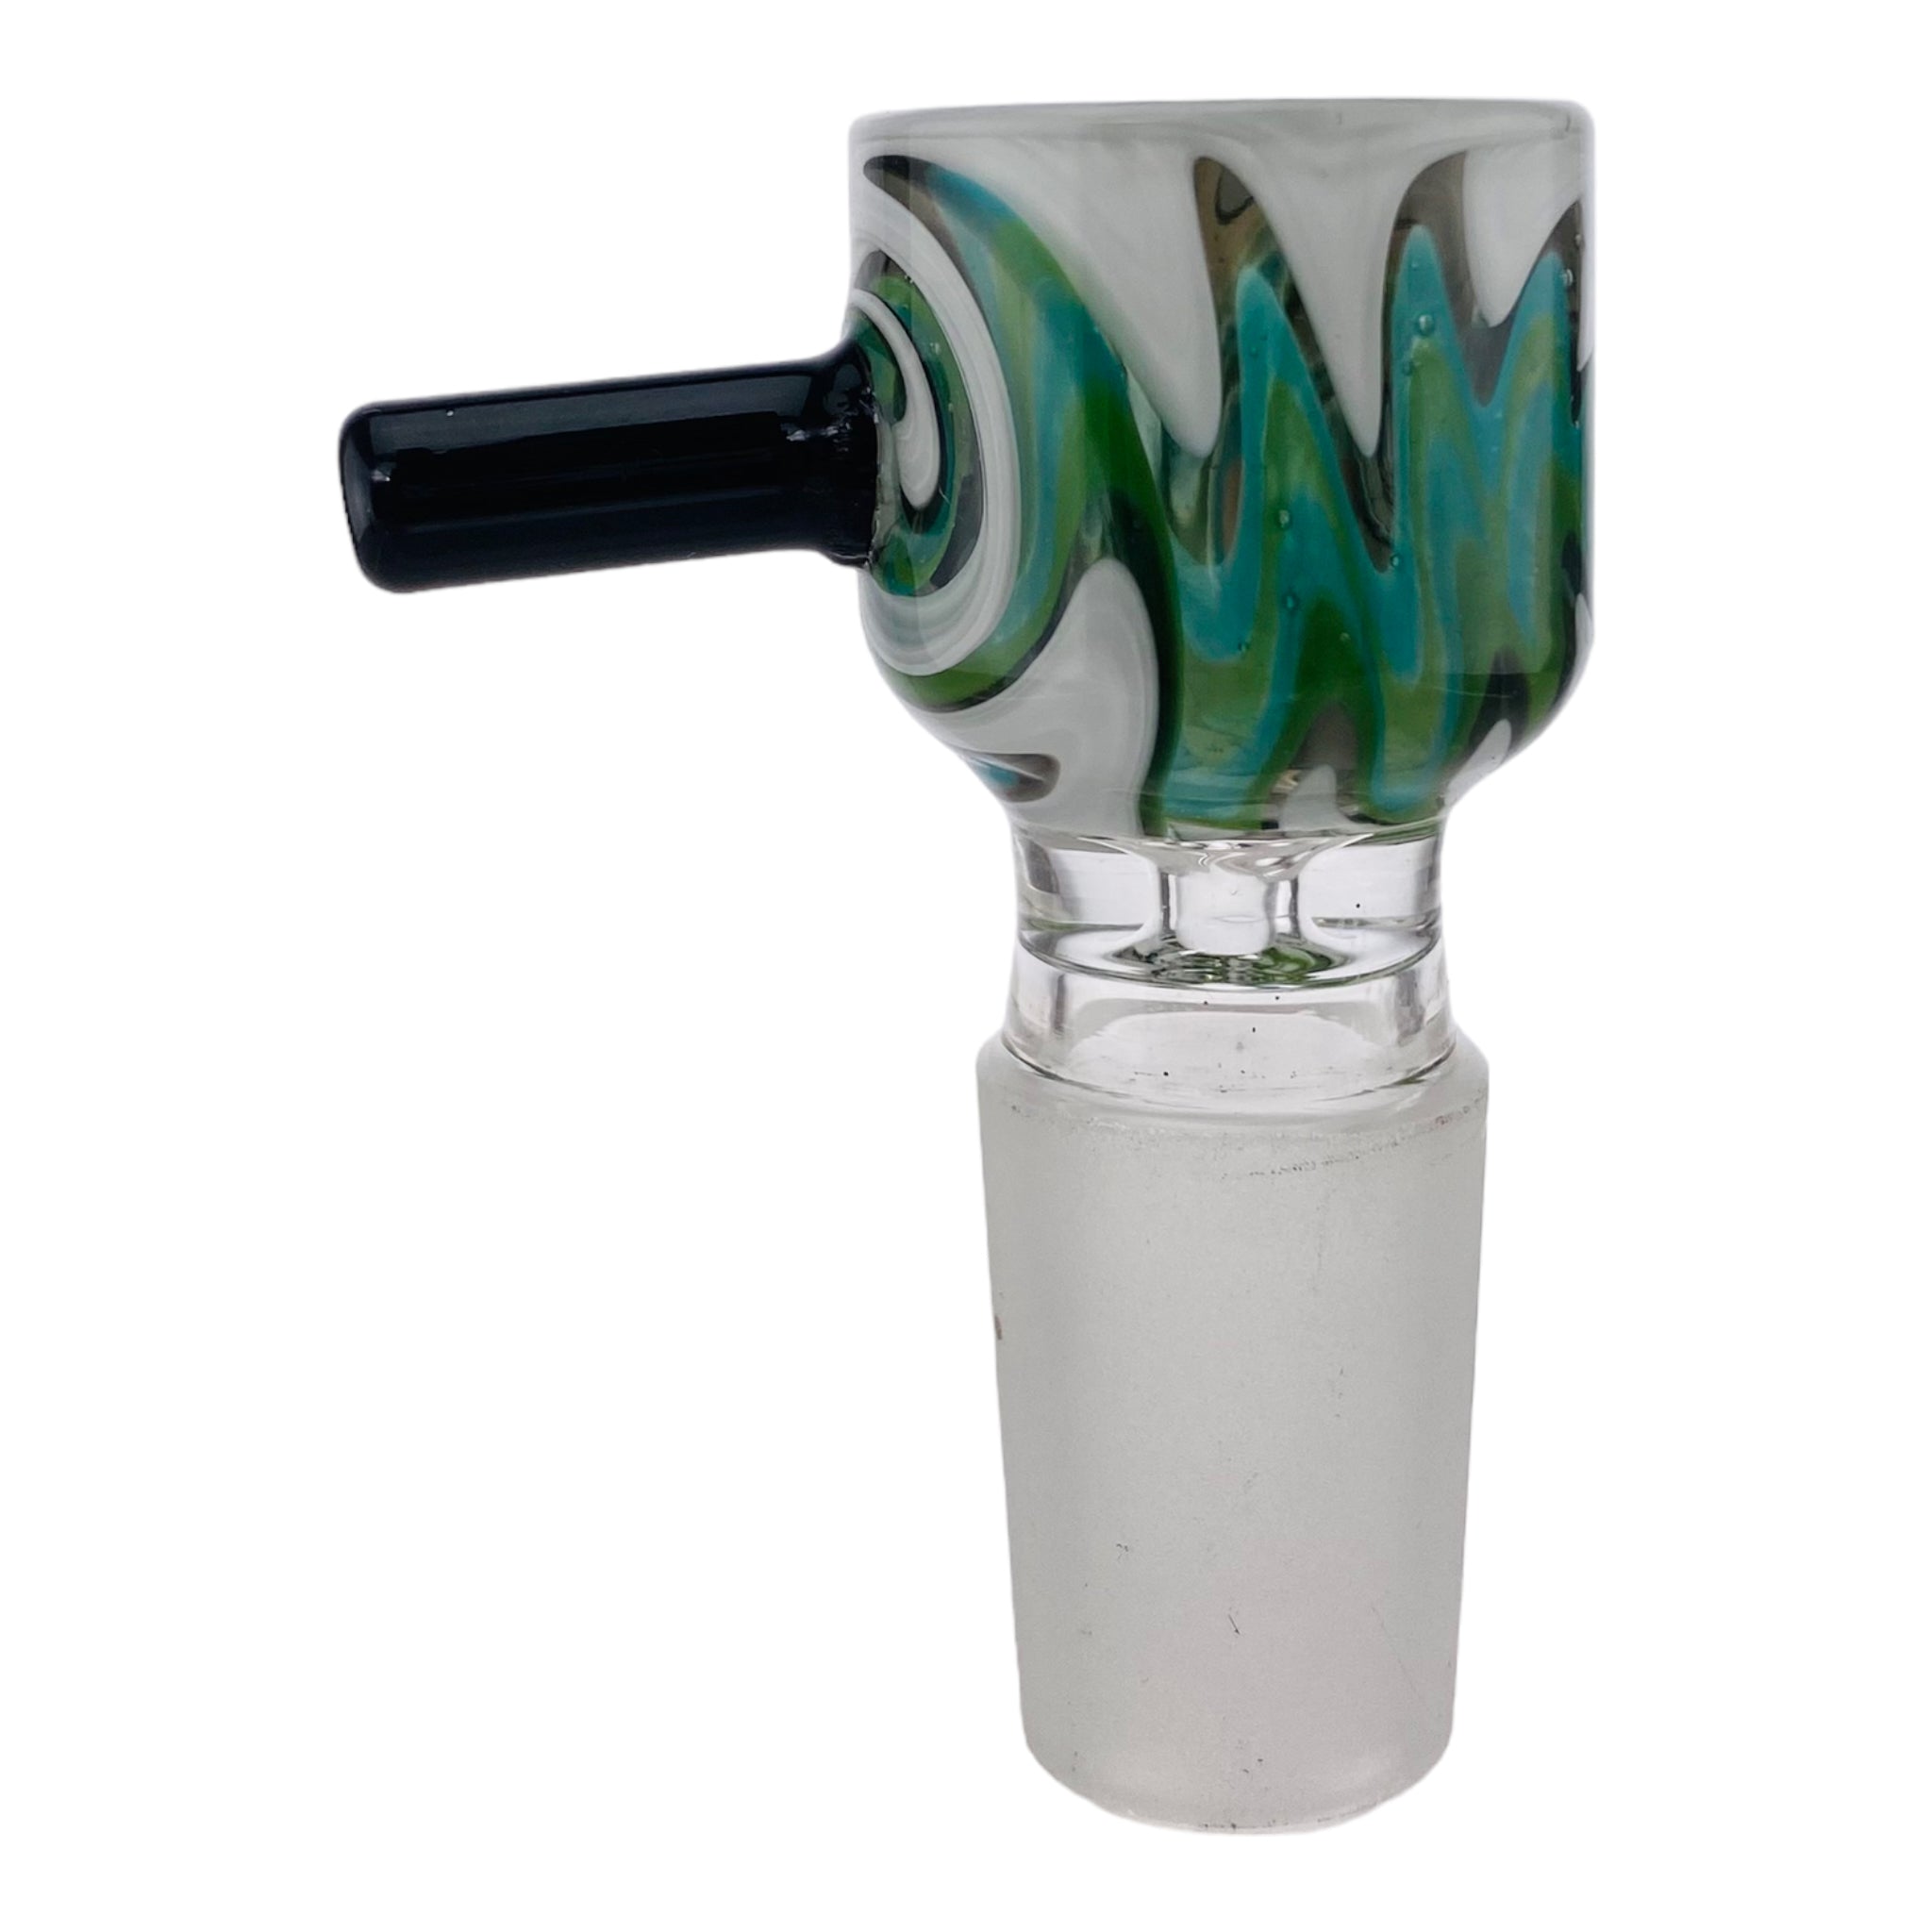 18mm Flower Bowl - Green Blue And White Cylinder Straight Wall Bong Bowl Piece